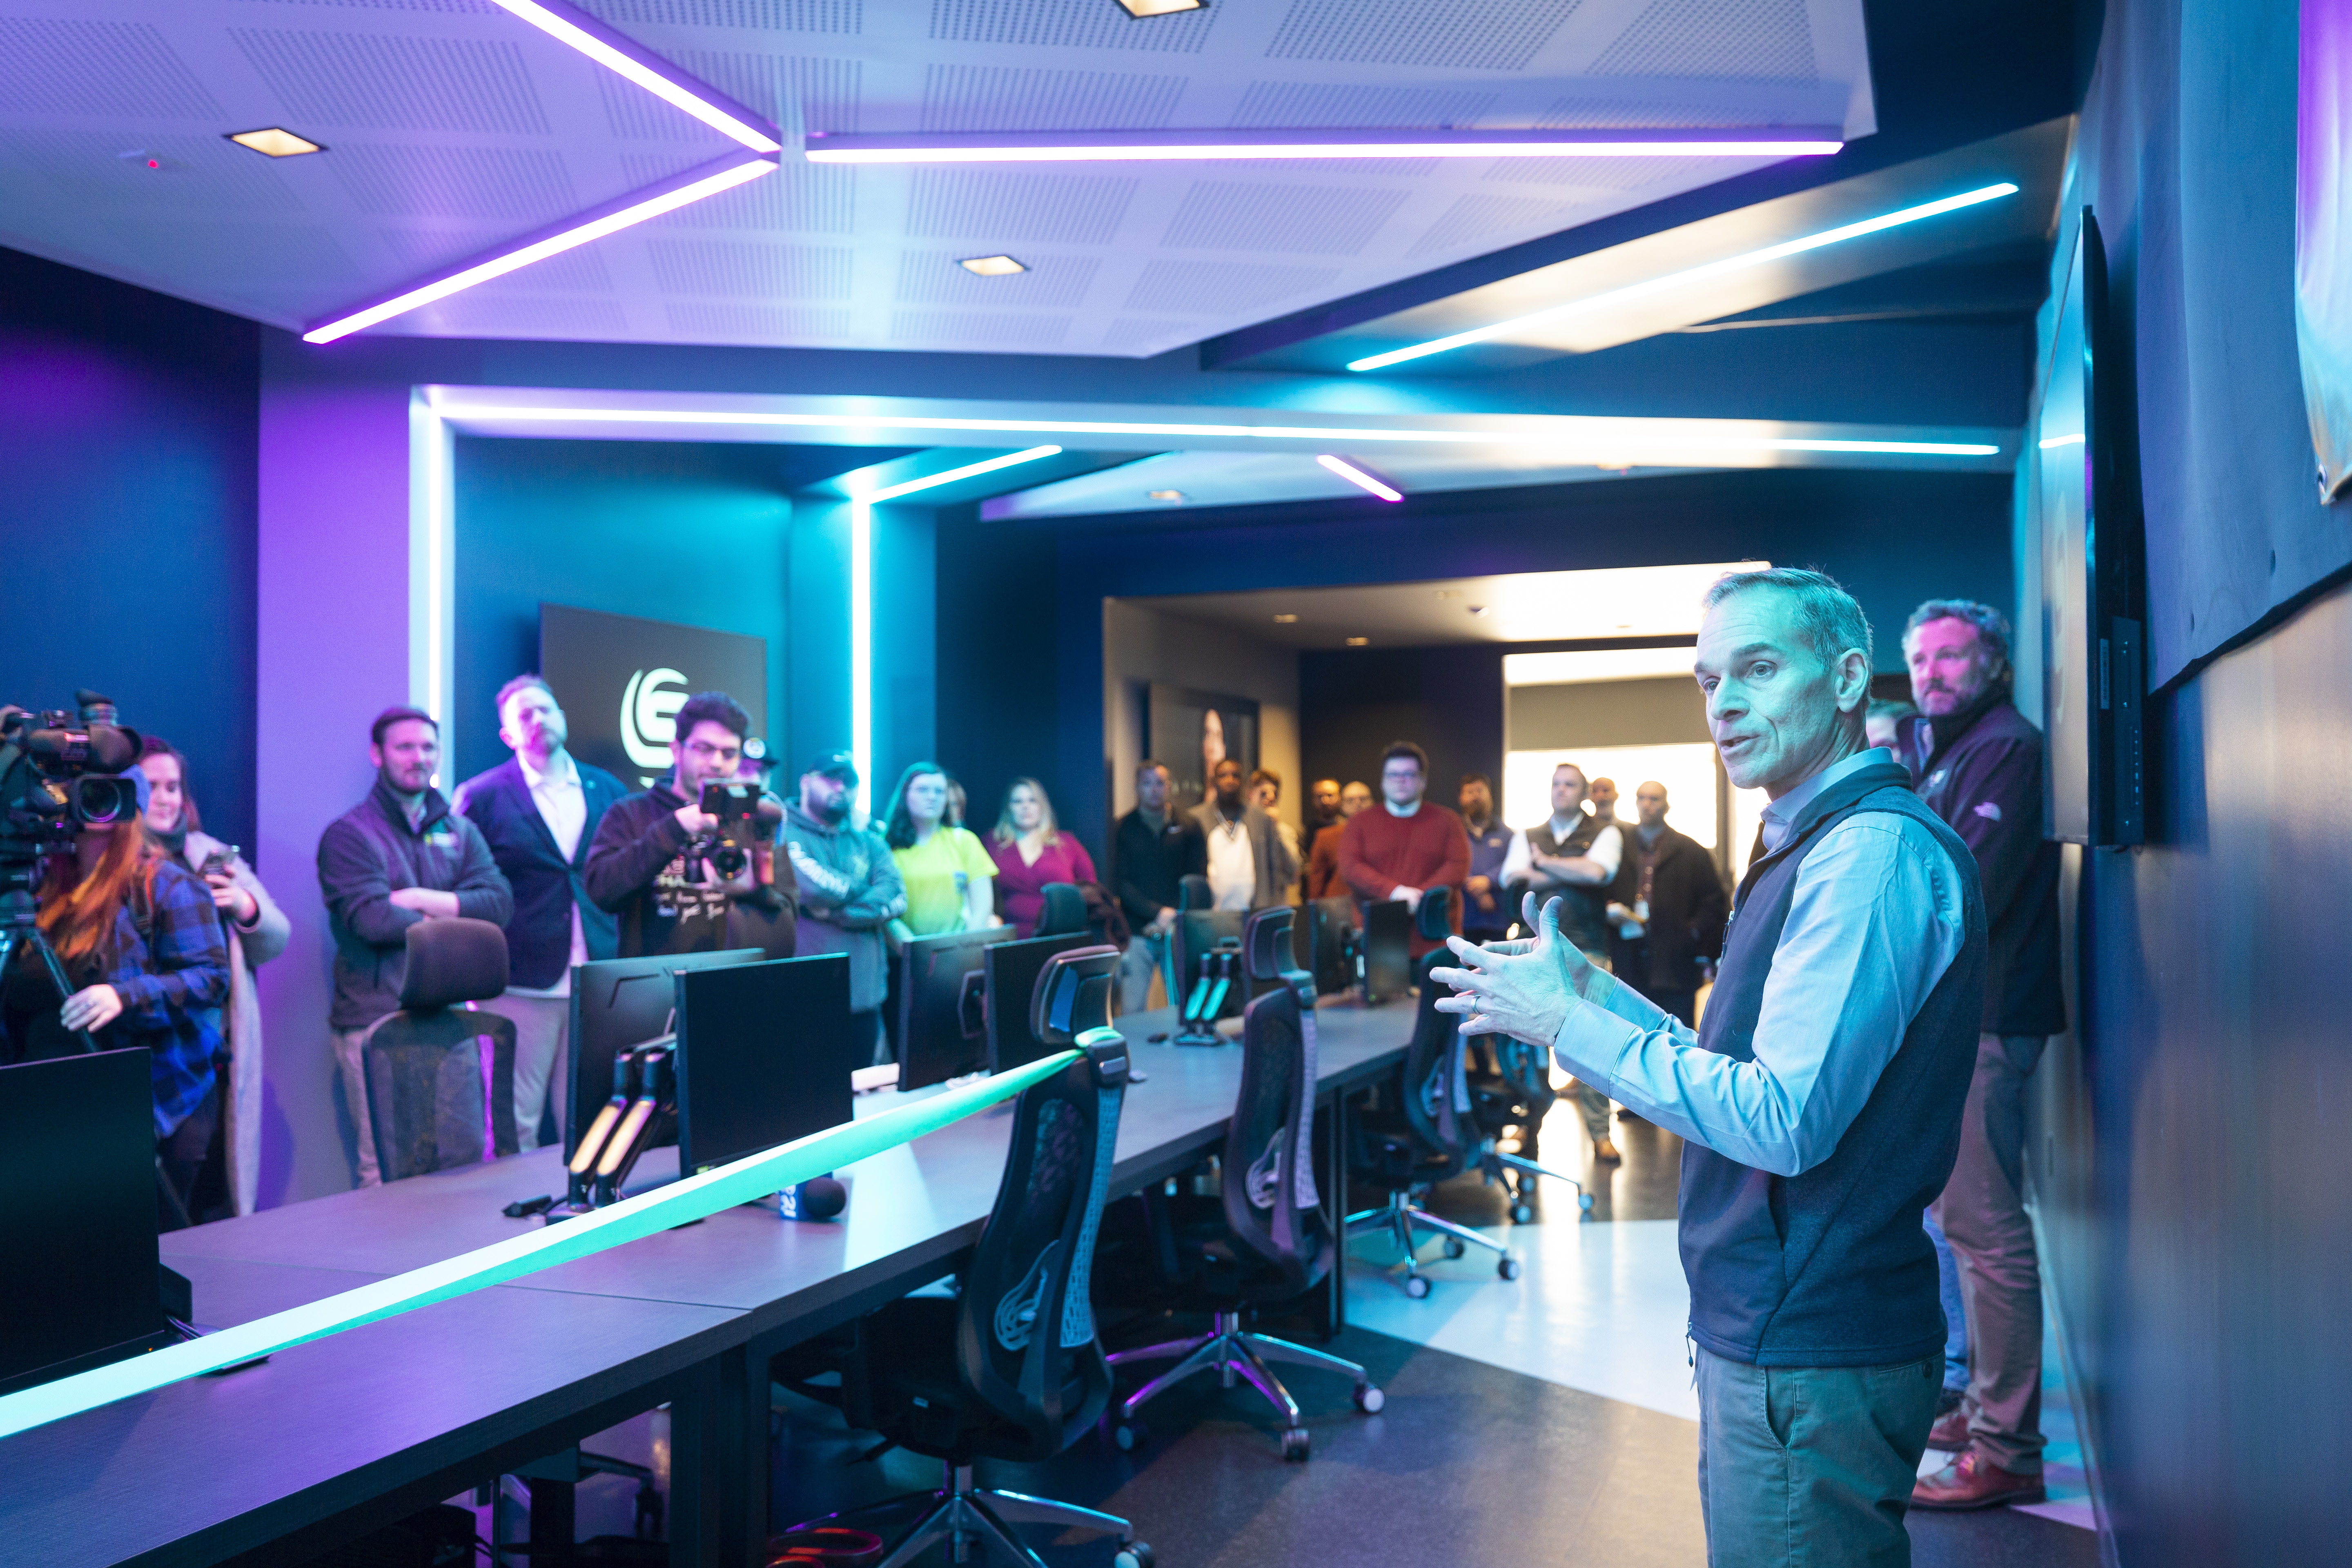 Playlabs esports lounge brings competitive, casual gaming to